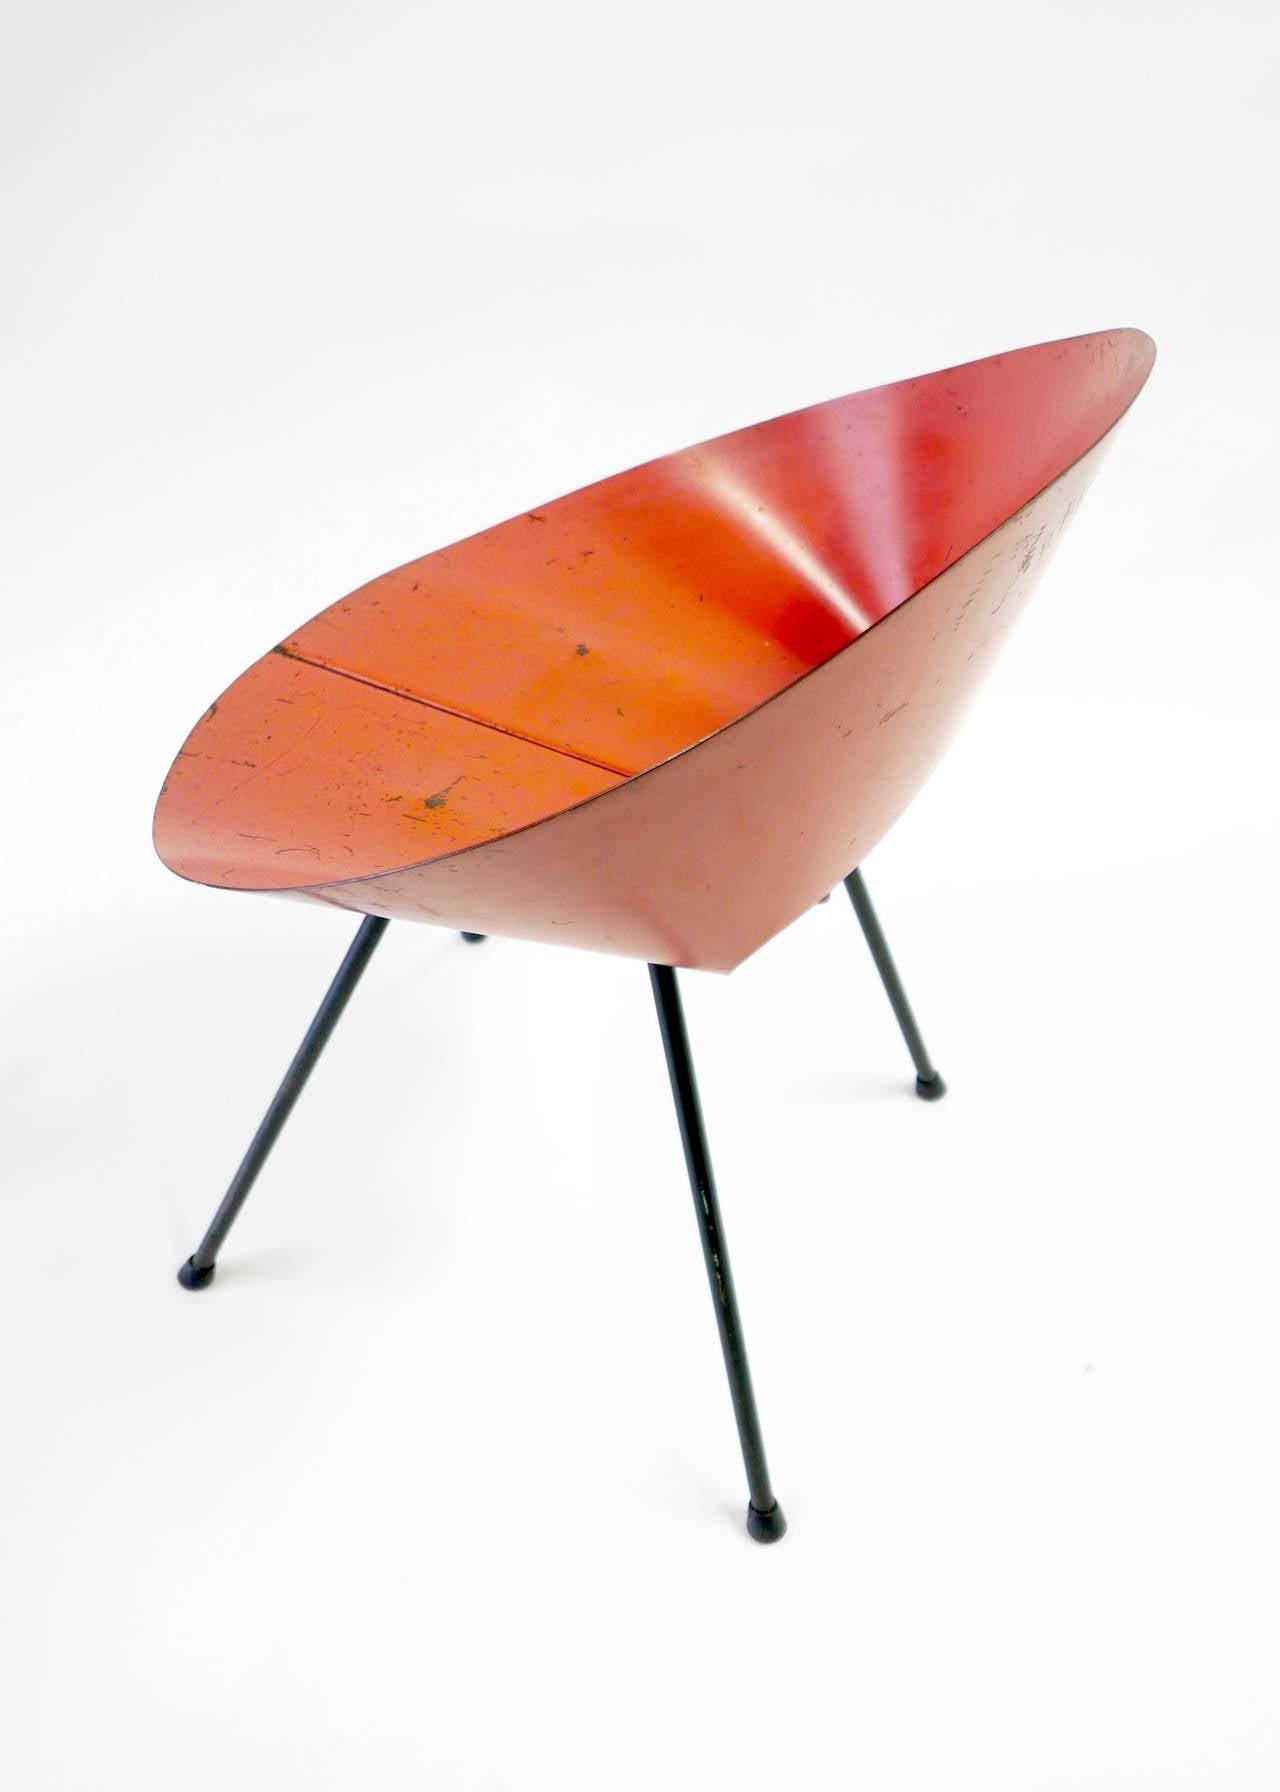 Steel Donald Knorr Chair, Knoll Associates 1948 For Sale